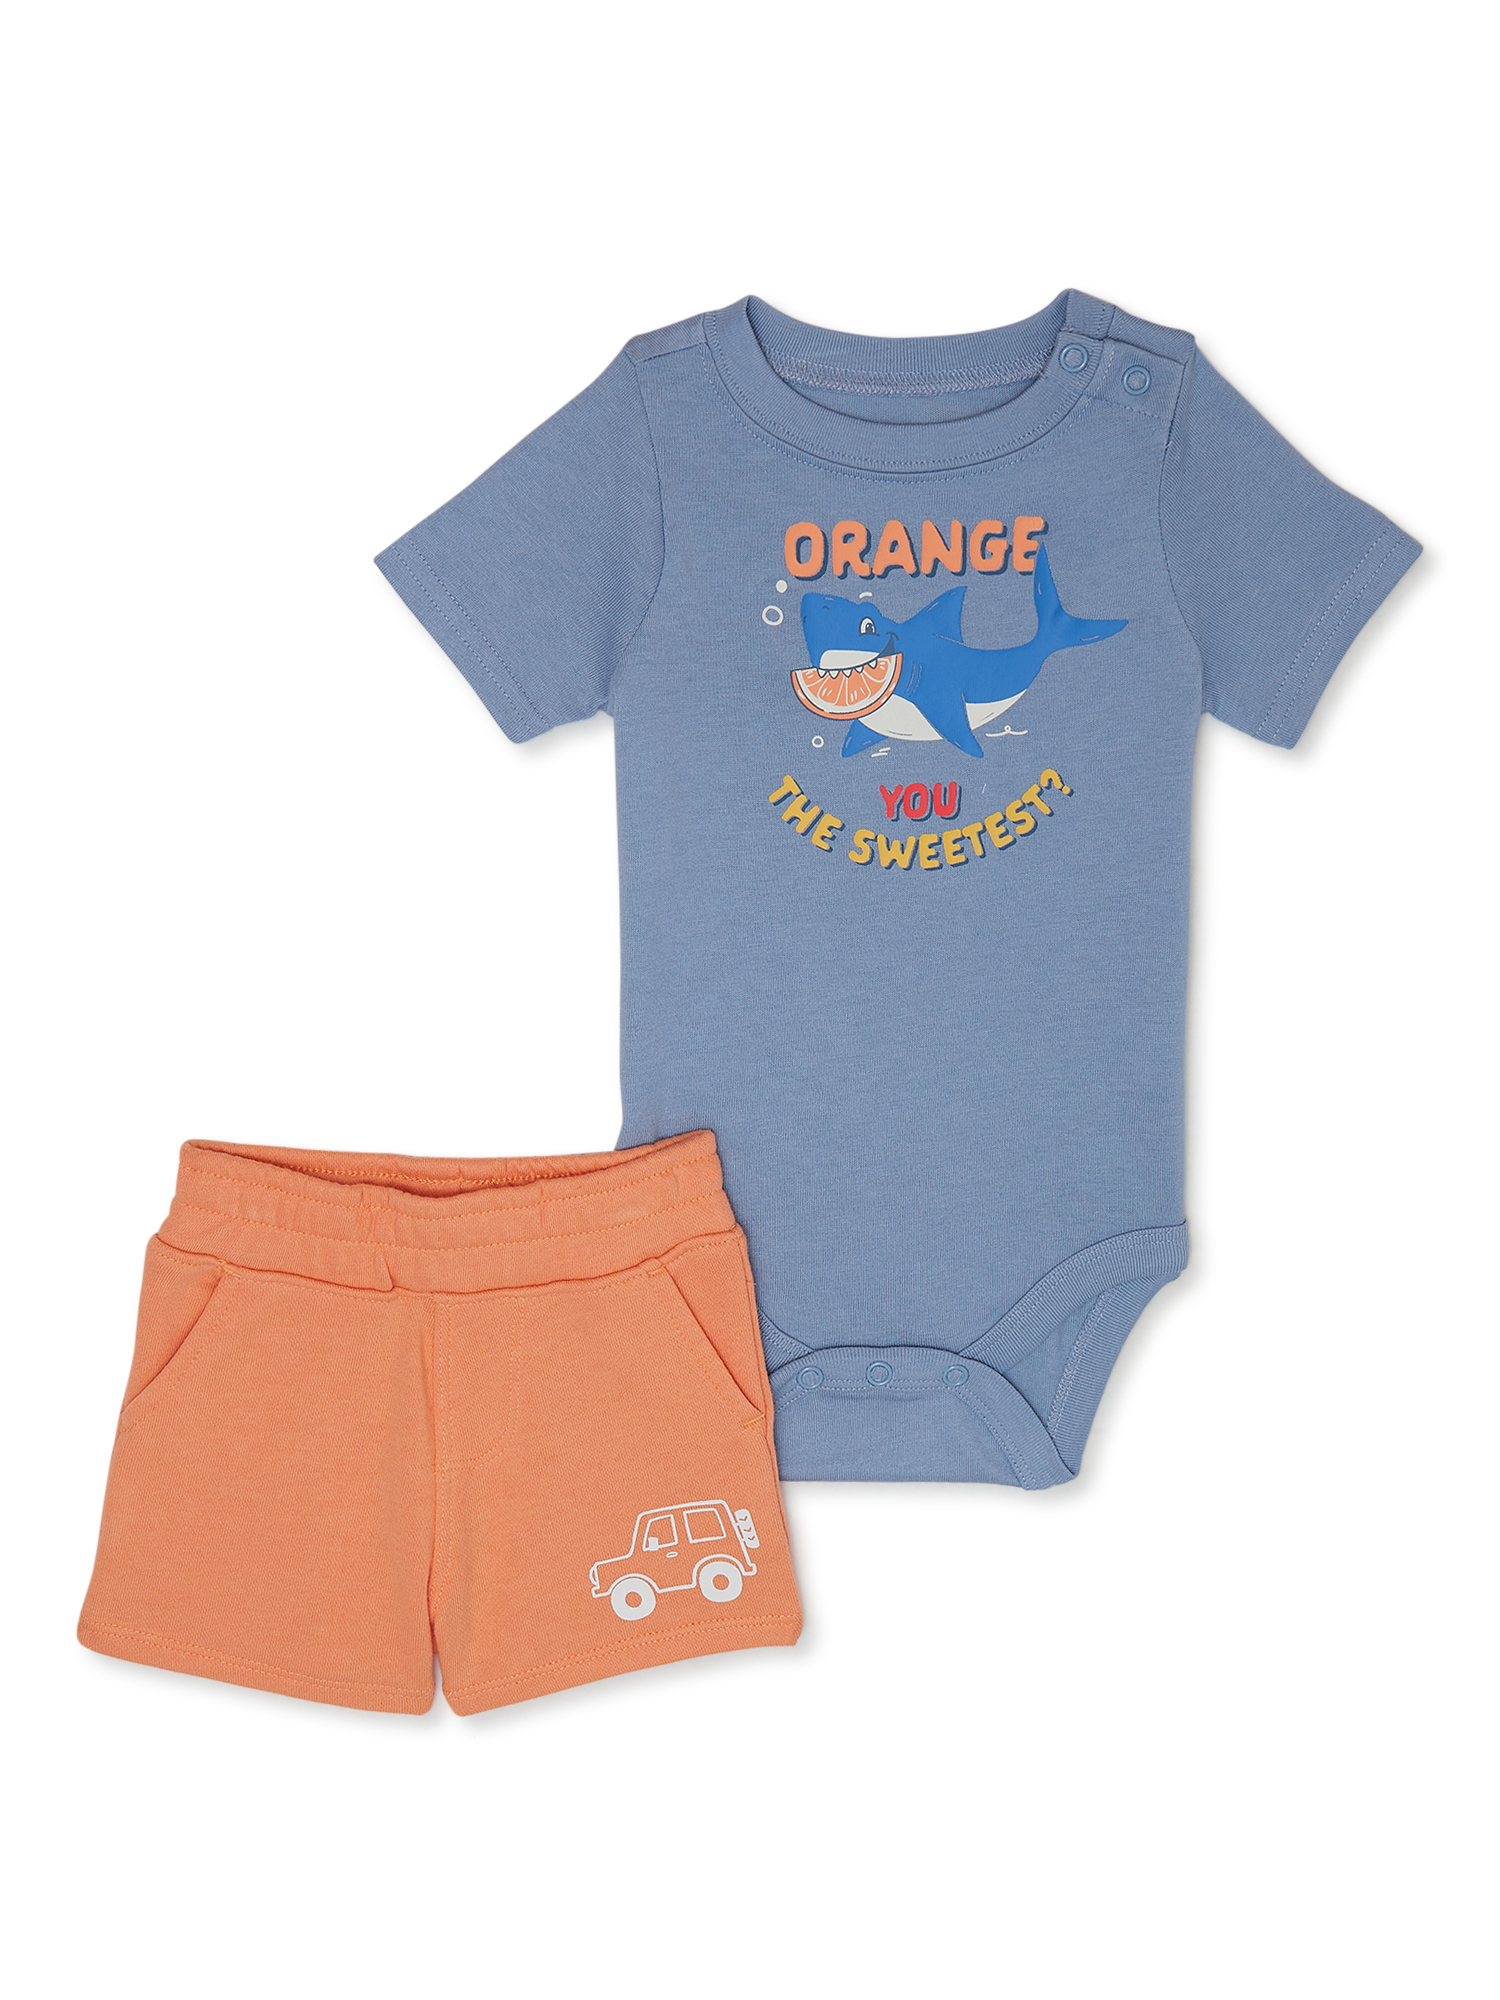 Garanimals Baby Boy Mix and Match Outfit Kid-Pack, 6-Piece, Sizes 0-24 Months - image 3 of 6